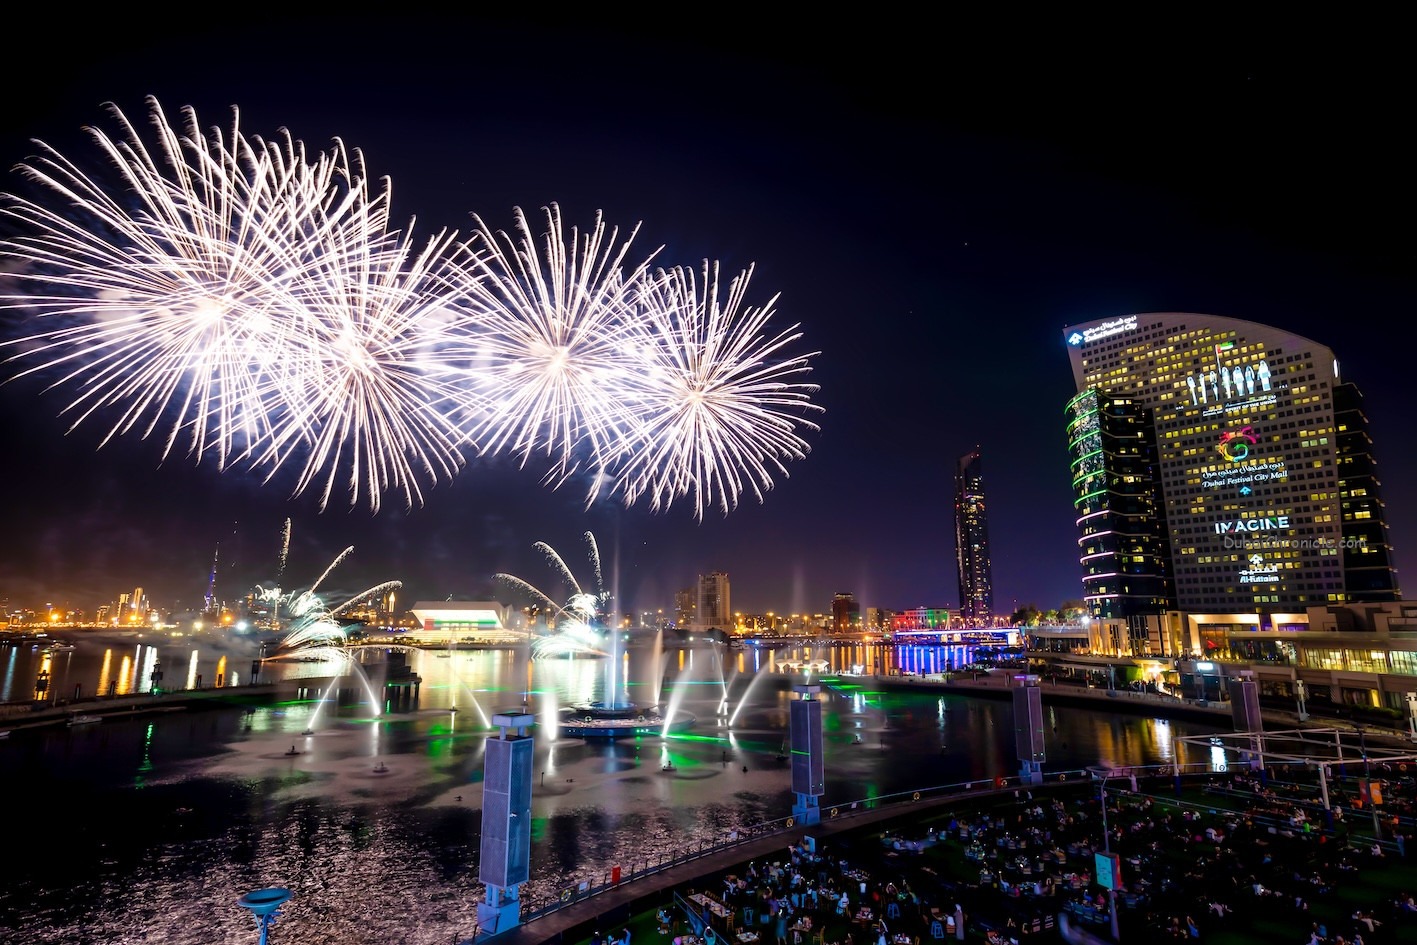 Across the city, a dazzling schedule of events, dining experiences, family fun and community gatherings will bring Dubai together this Eid al Fitr.